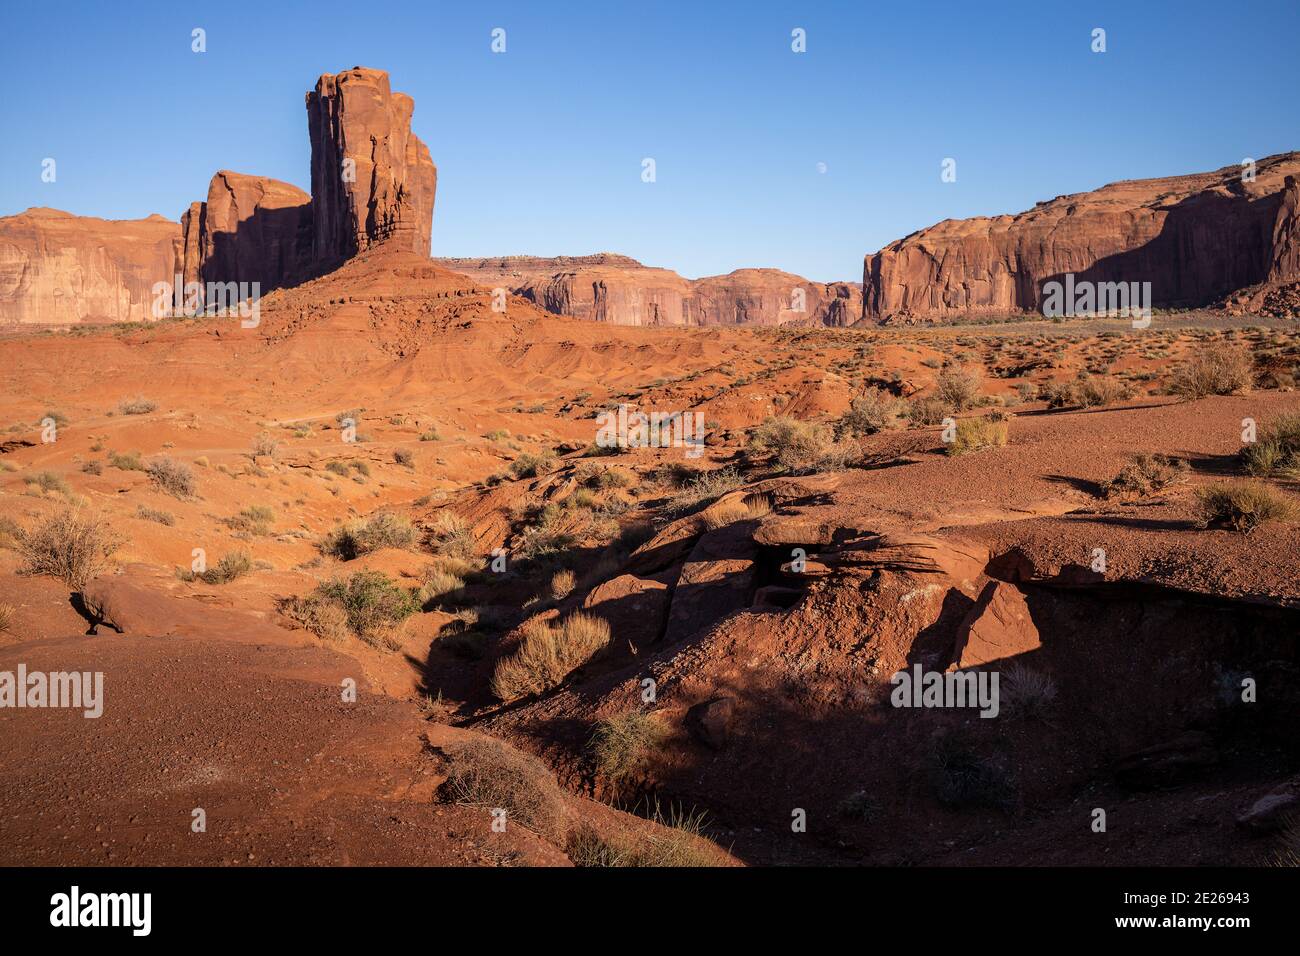 The Elephant Butte rock formation in Monument Valley Navajo Tribal Park which straddles the Arizona and Utah state line, USA Stock Photo